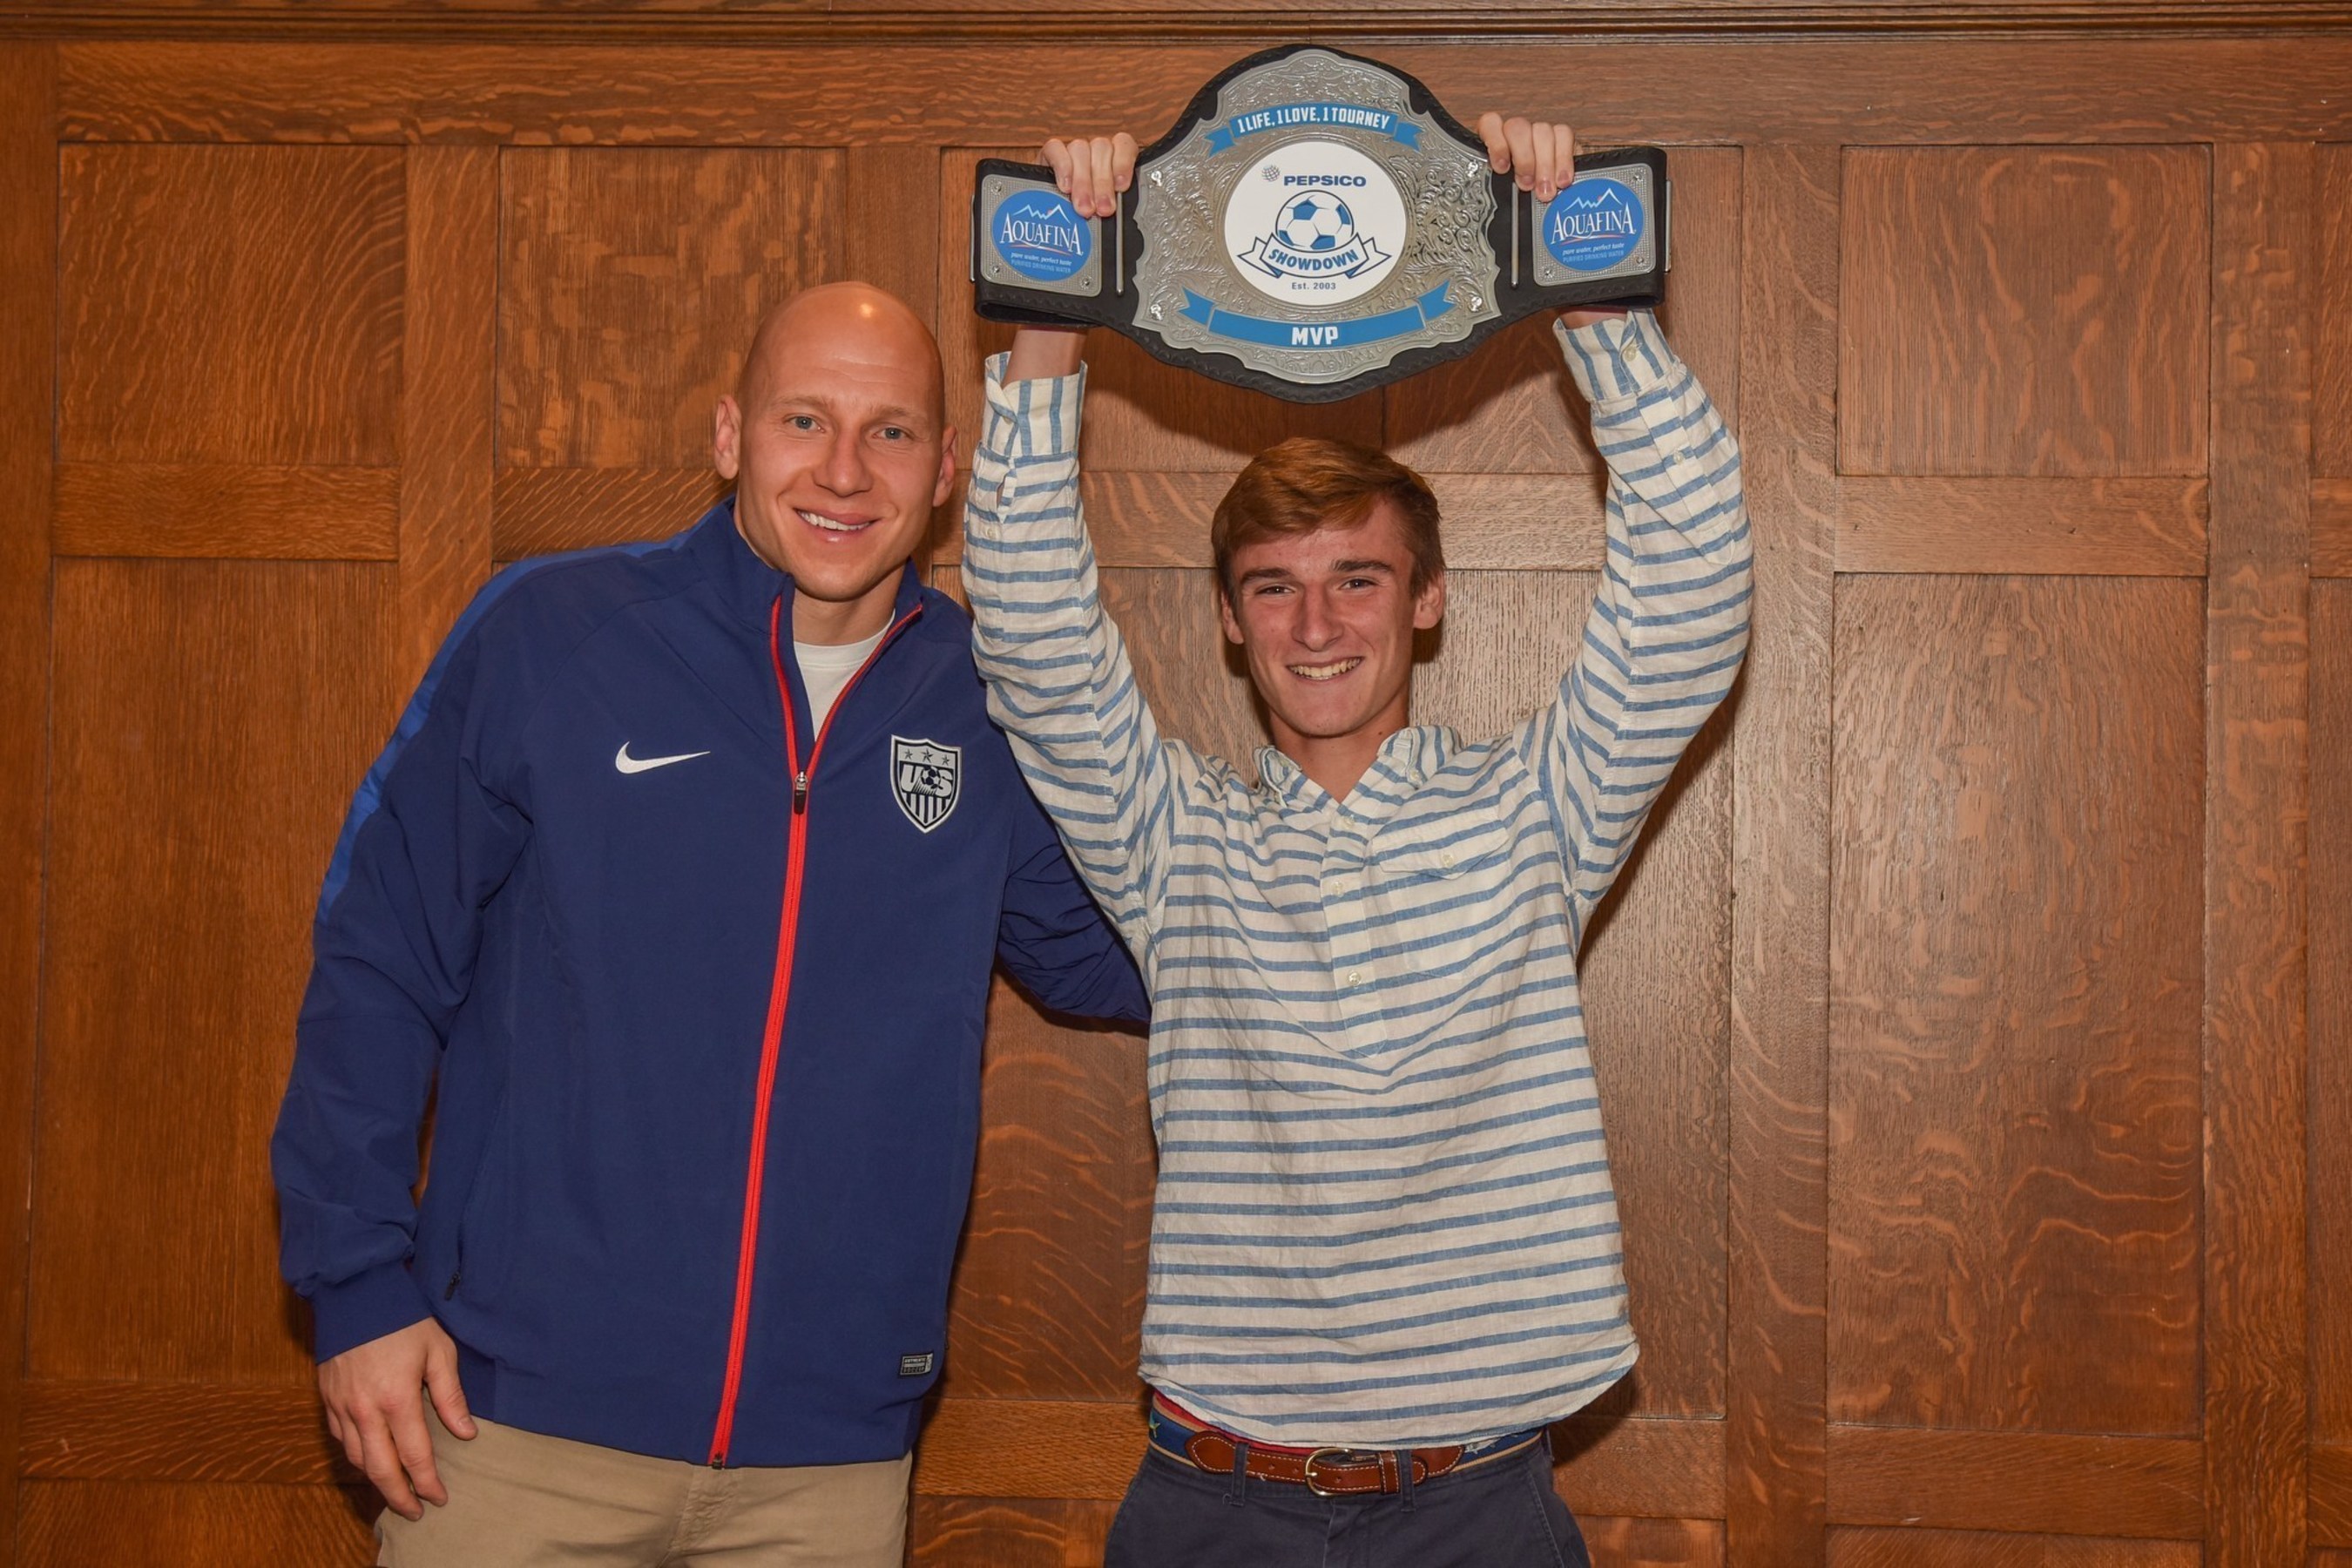 U.S. Men's National Team and Aston Villa starting goalie Brad Guzan (left) presented the 12th Annual PepsiCo Showdown MVP Belt to Lyons Township's Nick Economou after popping in and surprising him during study hall on Wednesday morning in Chicago.